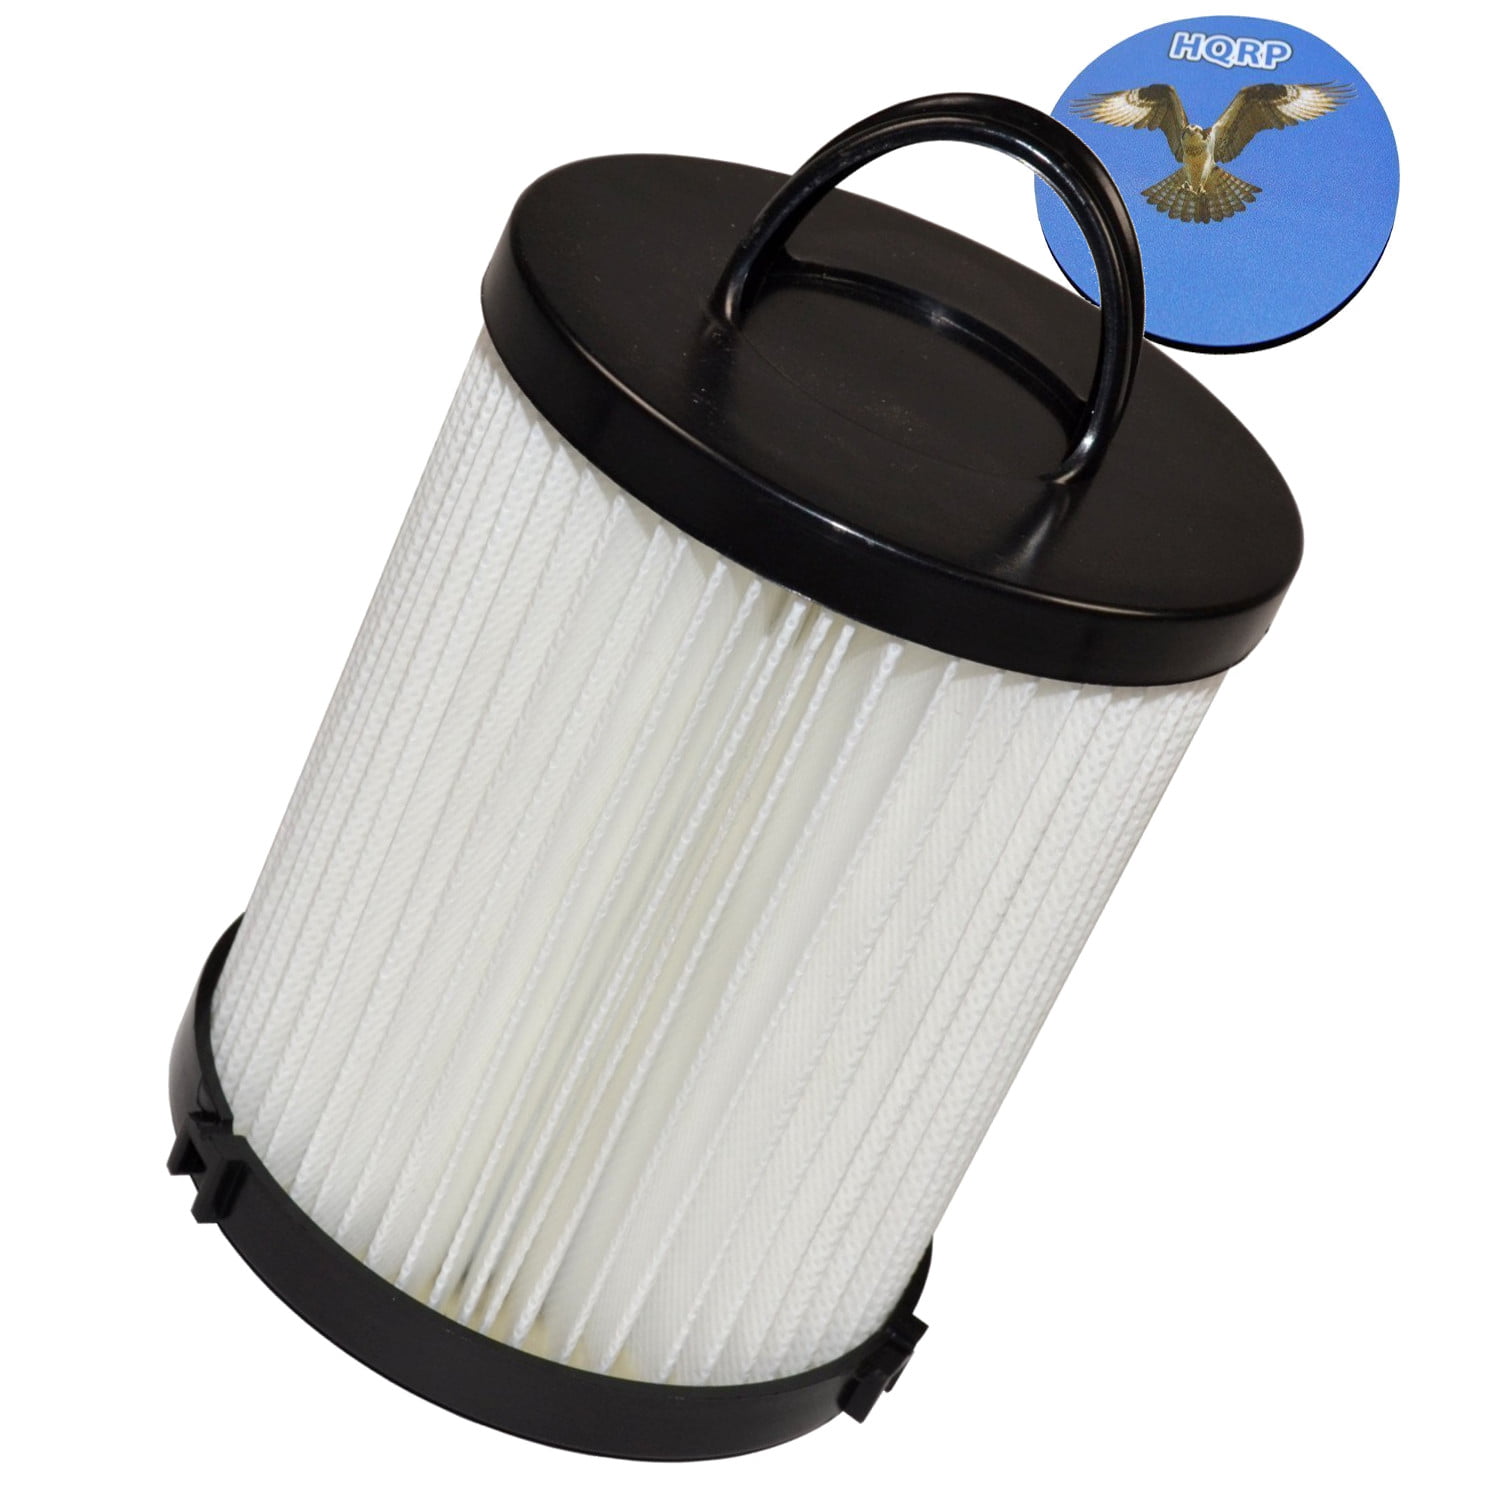 HQRP H13 HEPA Dust Cup Filter for Eureka DCF-21 EF-91 EF-91B Vacuum Cleaner 